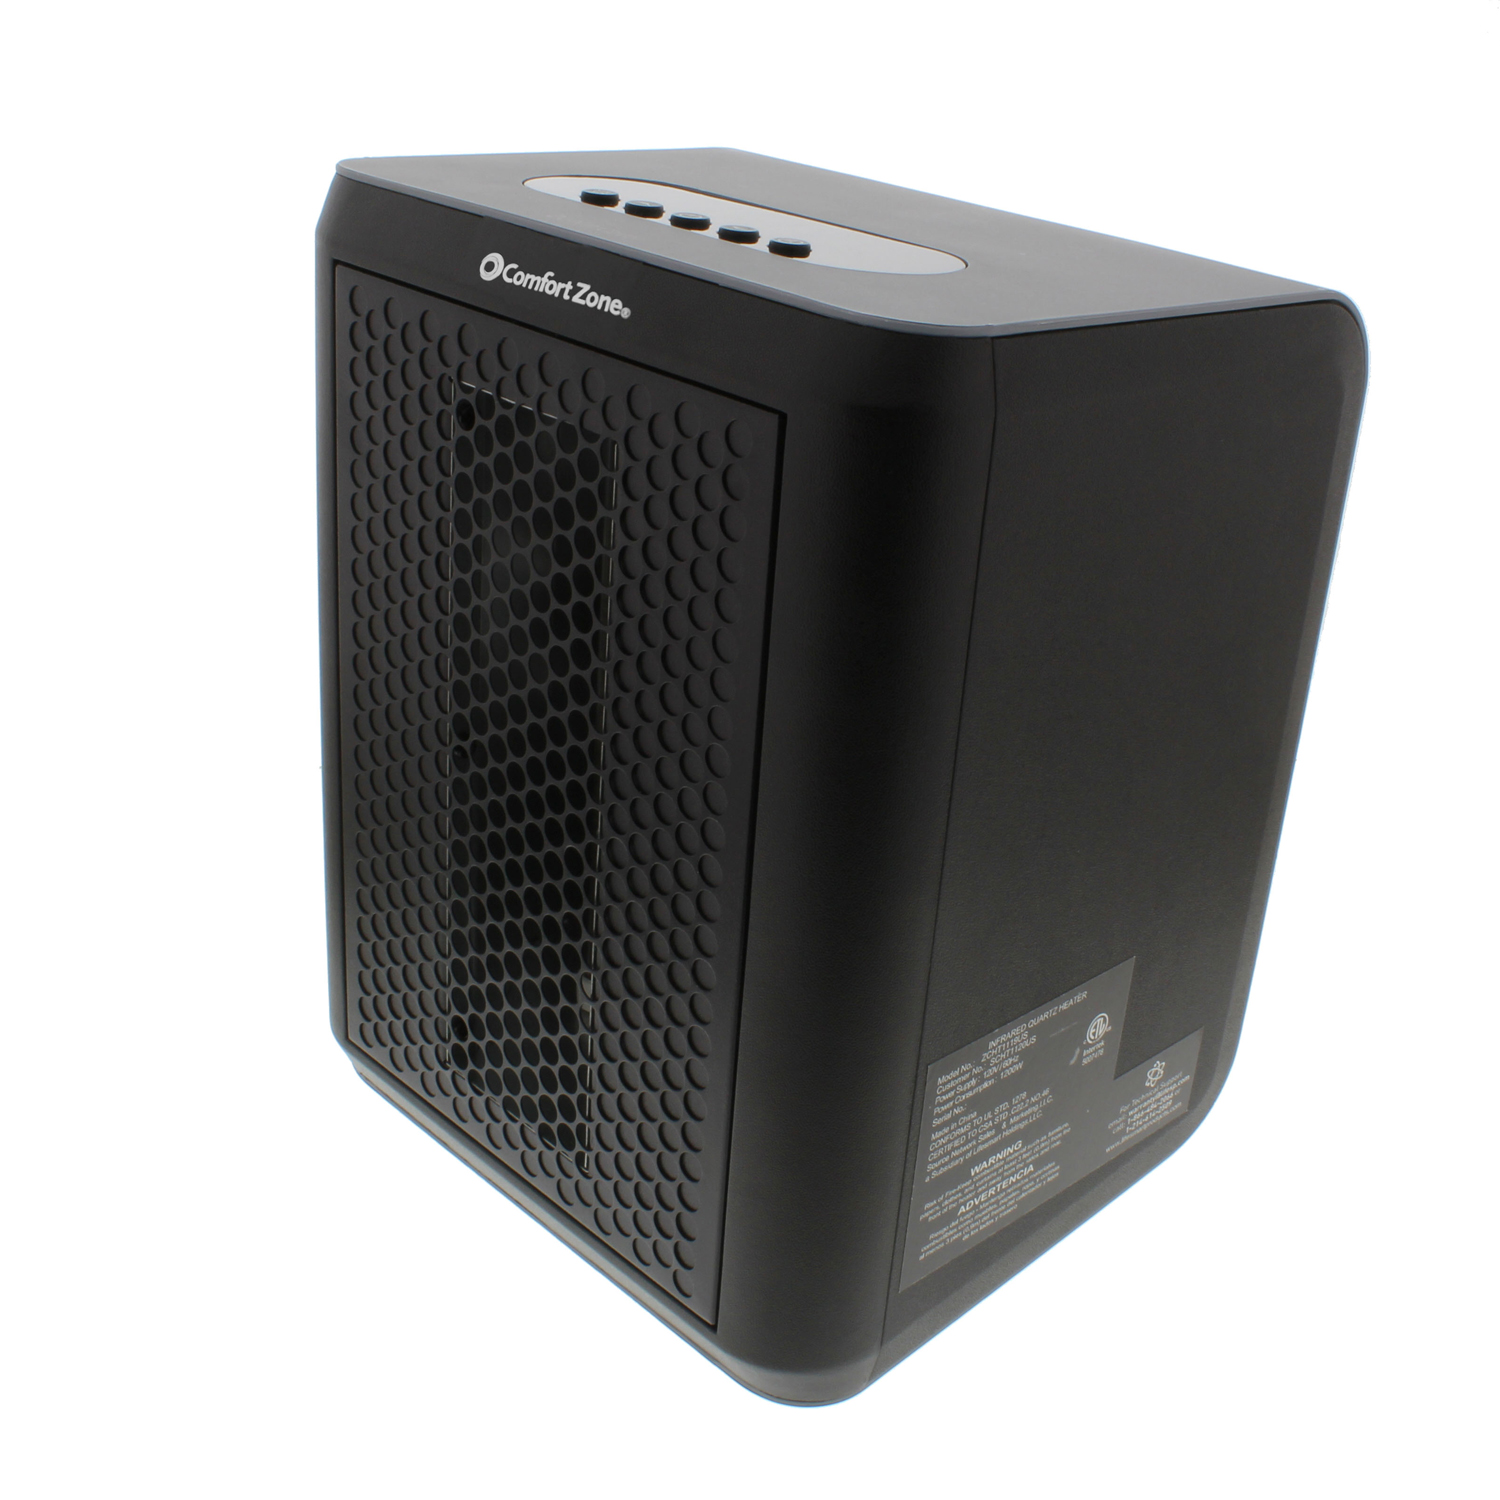 Comfort Zone Infrared Electric Portable Desktop Space Heater, Black - image 2 of 4